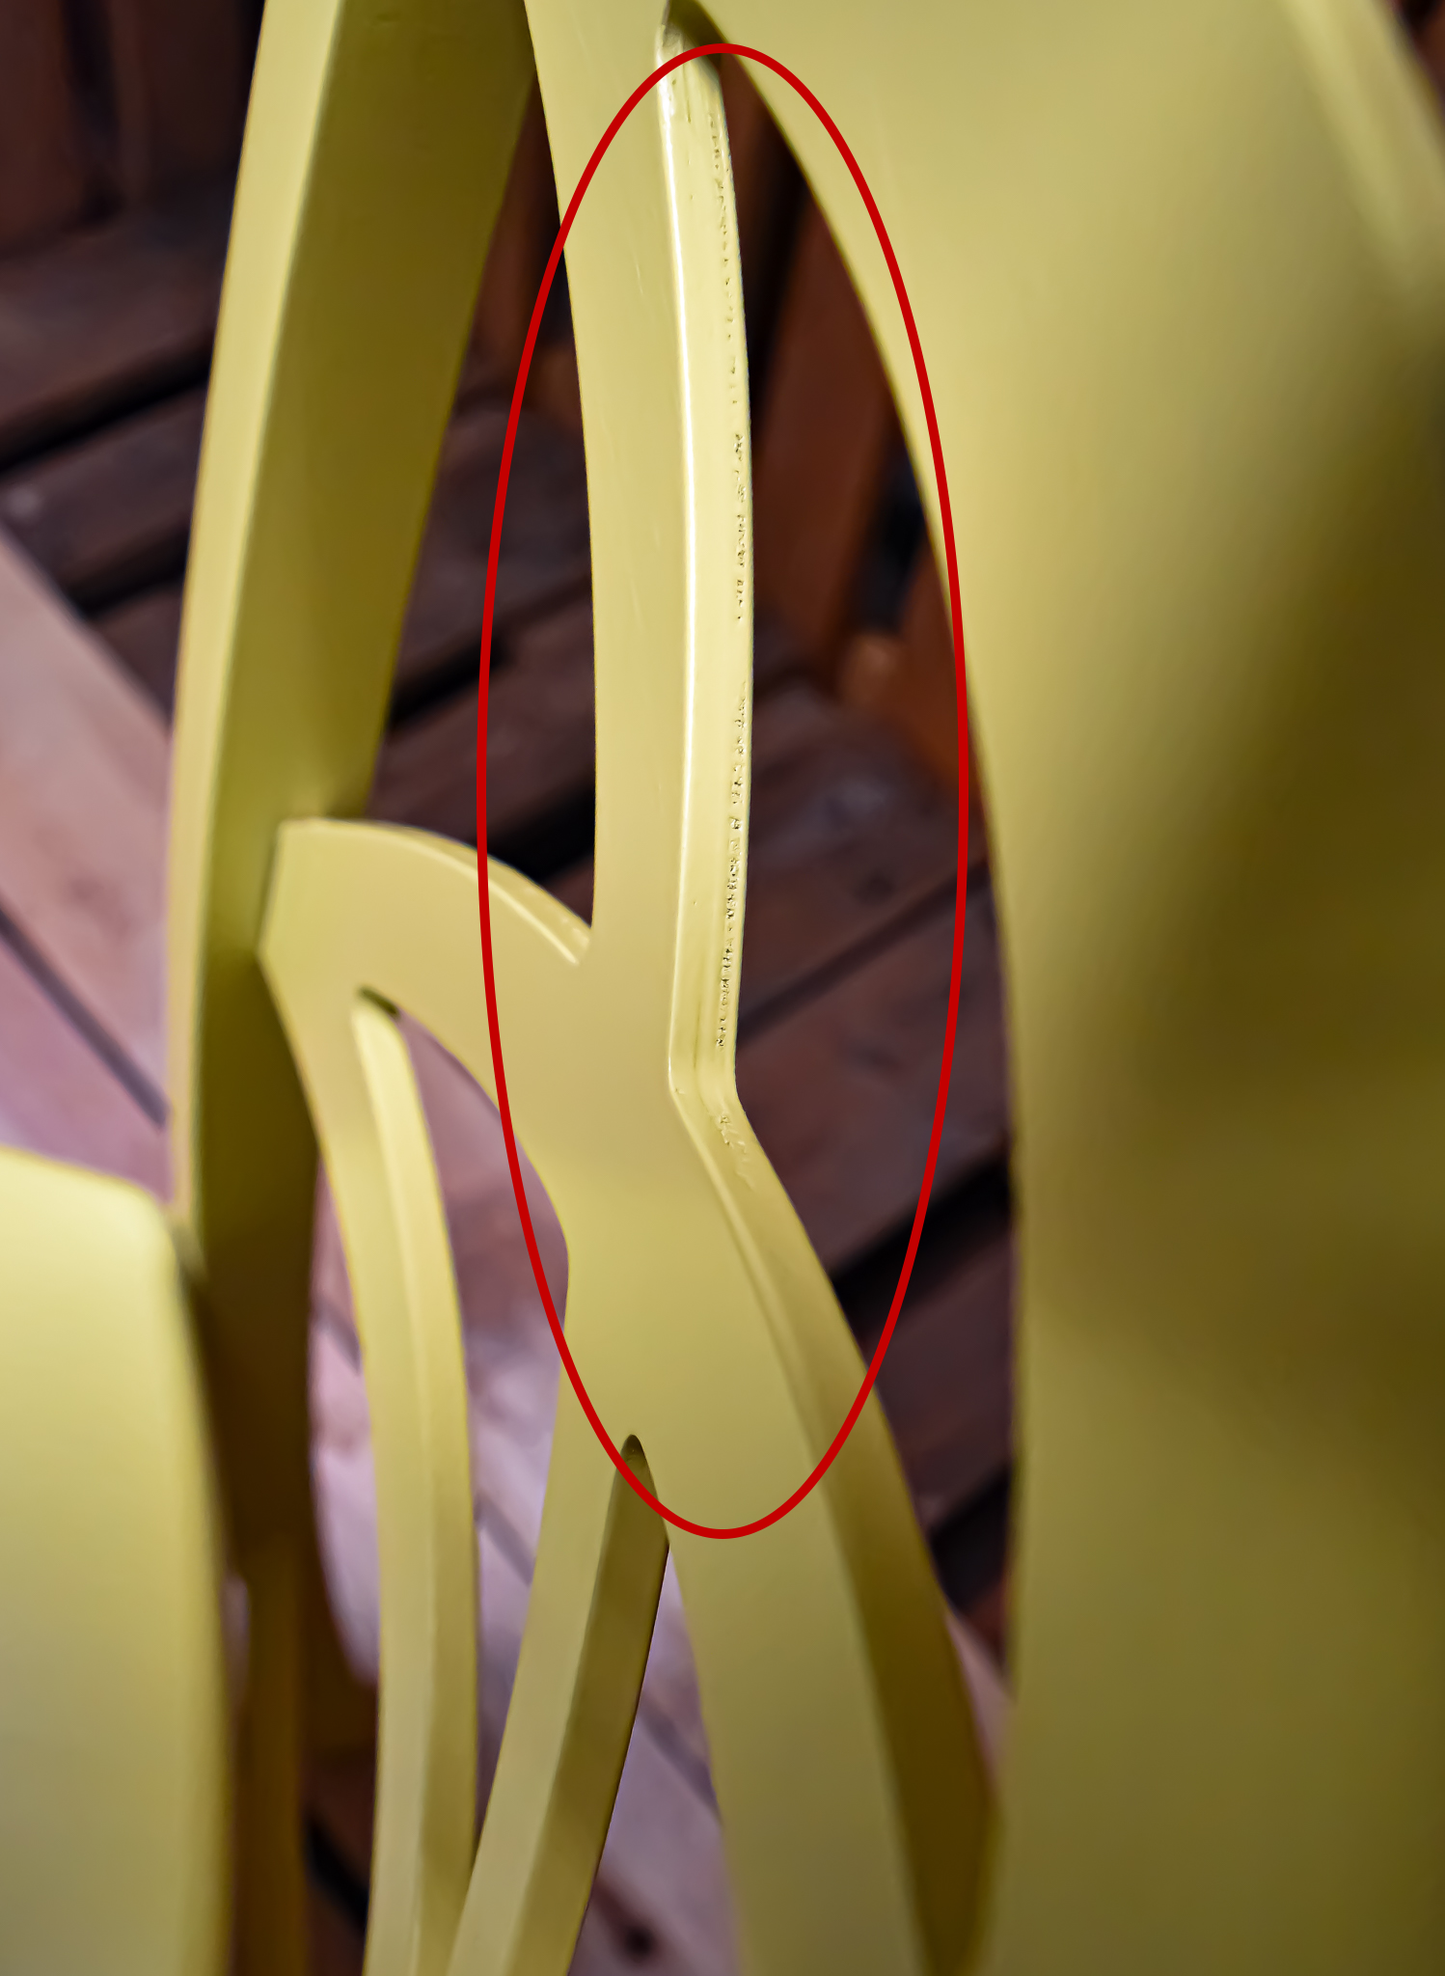 Stock chairs model 33 yellow color wooden seat